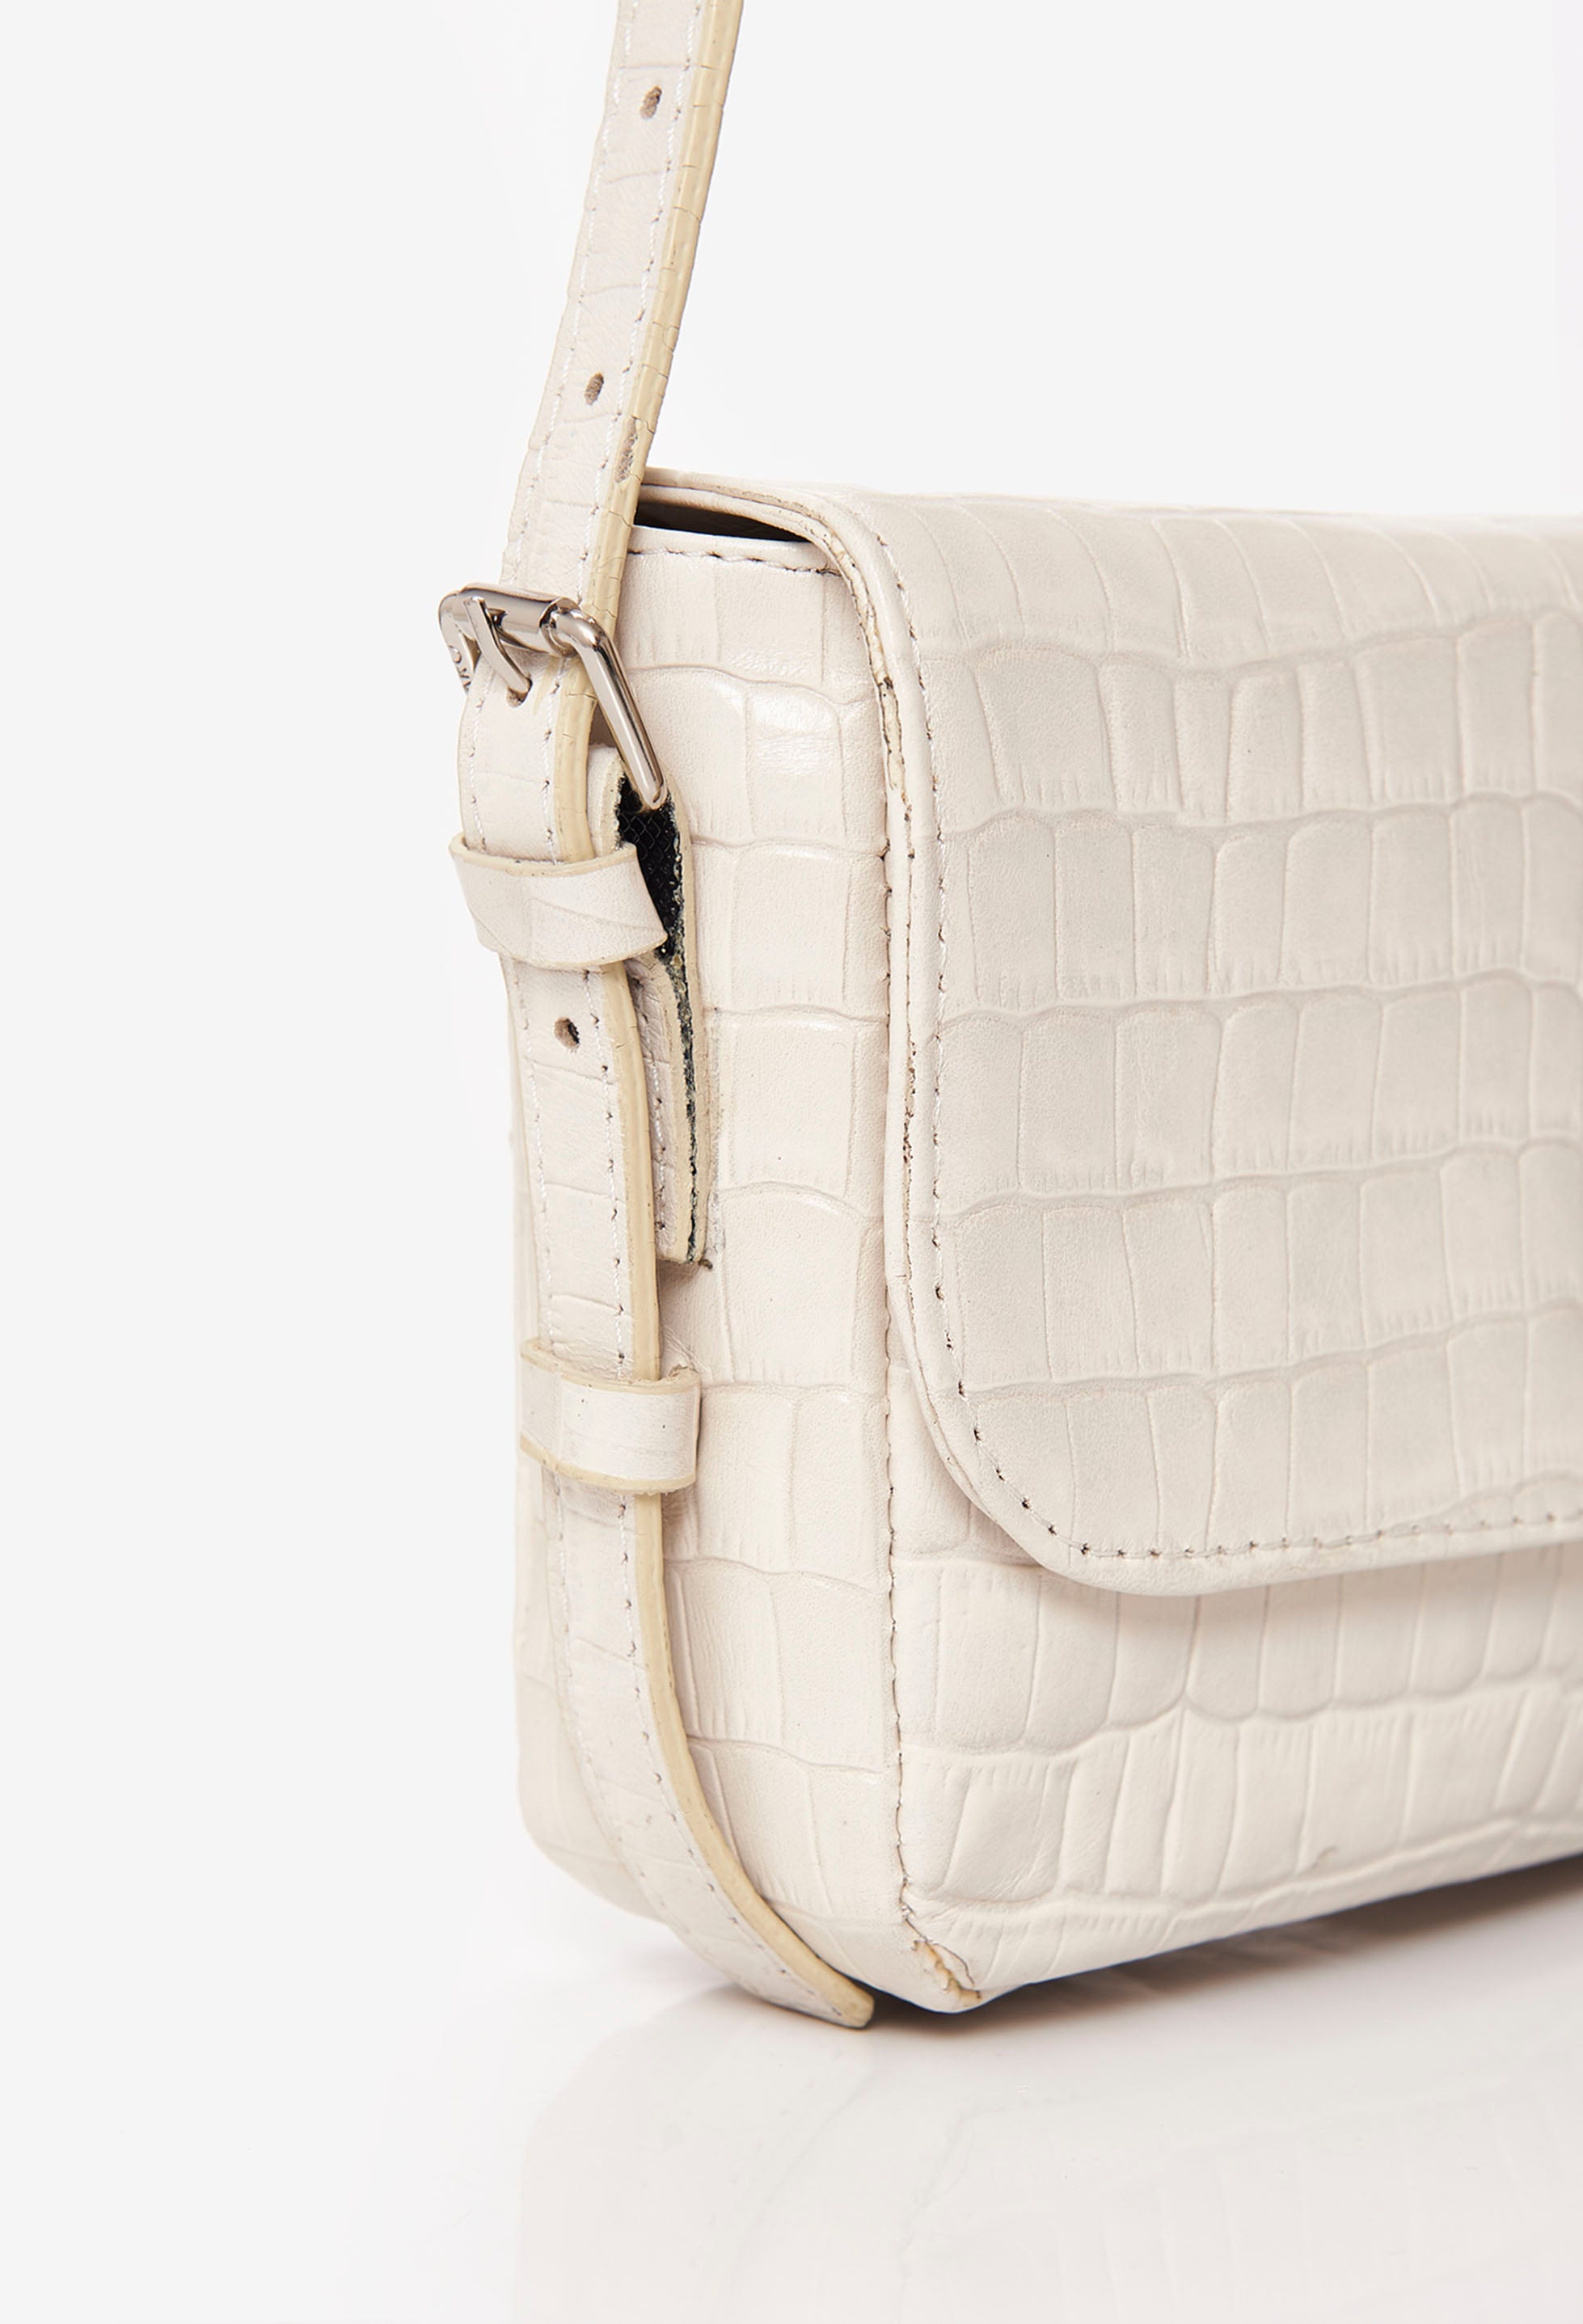 Partial photo of a White Croco Leather Shoulder Flap Bag Gwen with an adjustable shoulder strap.